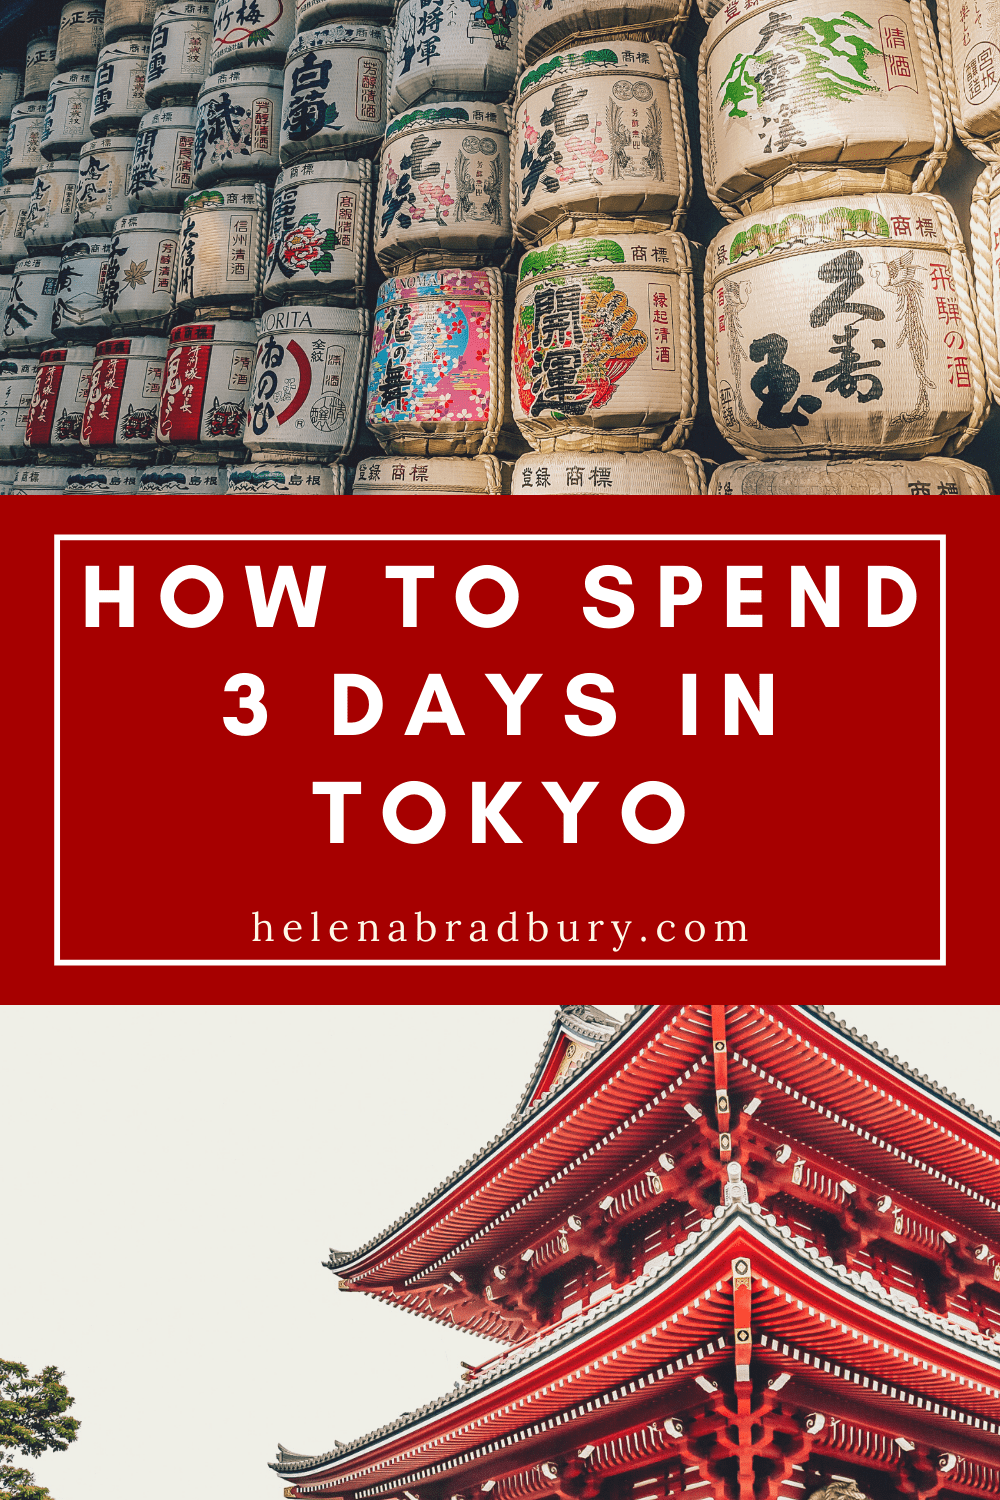 72 hours in Tokyo, Japan on a budget | Helena Bradbury travel blogger | 3 days in Tokyo | 48 hours in Tokyo | weekend in Tokyo what to do | Tokyo travel tips | tokyo travel blog | tokyo japan travel guide | tokyo japan travel tips | where to do in t…